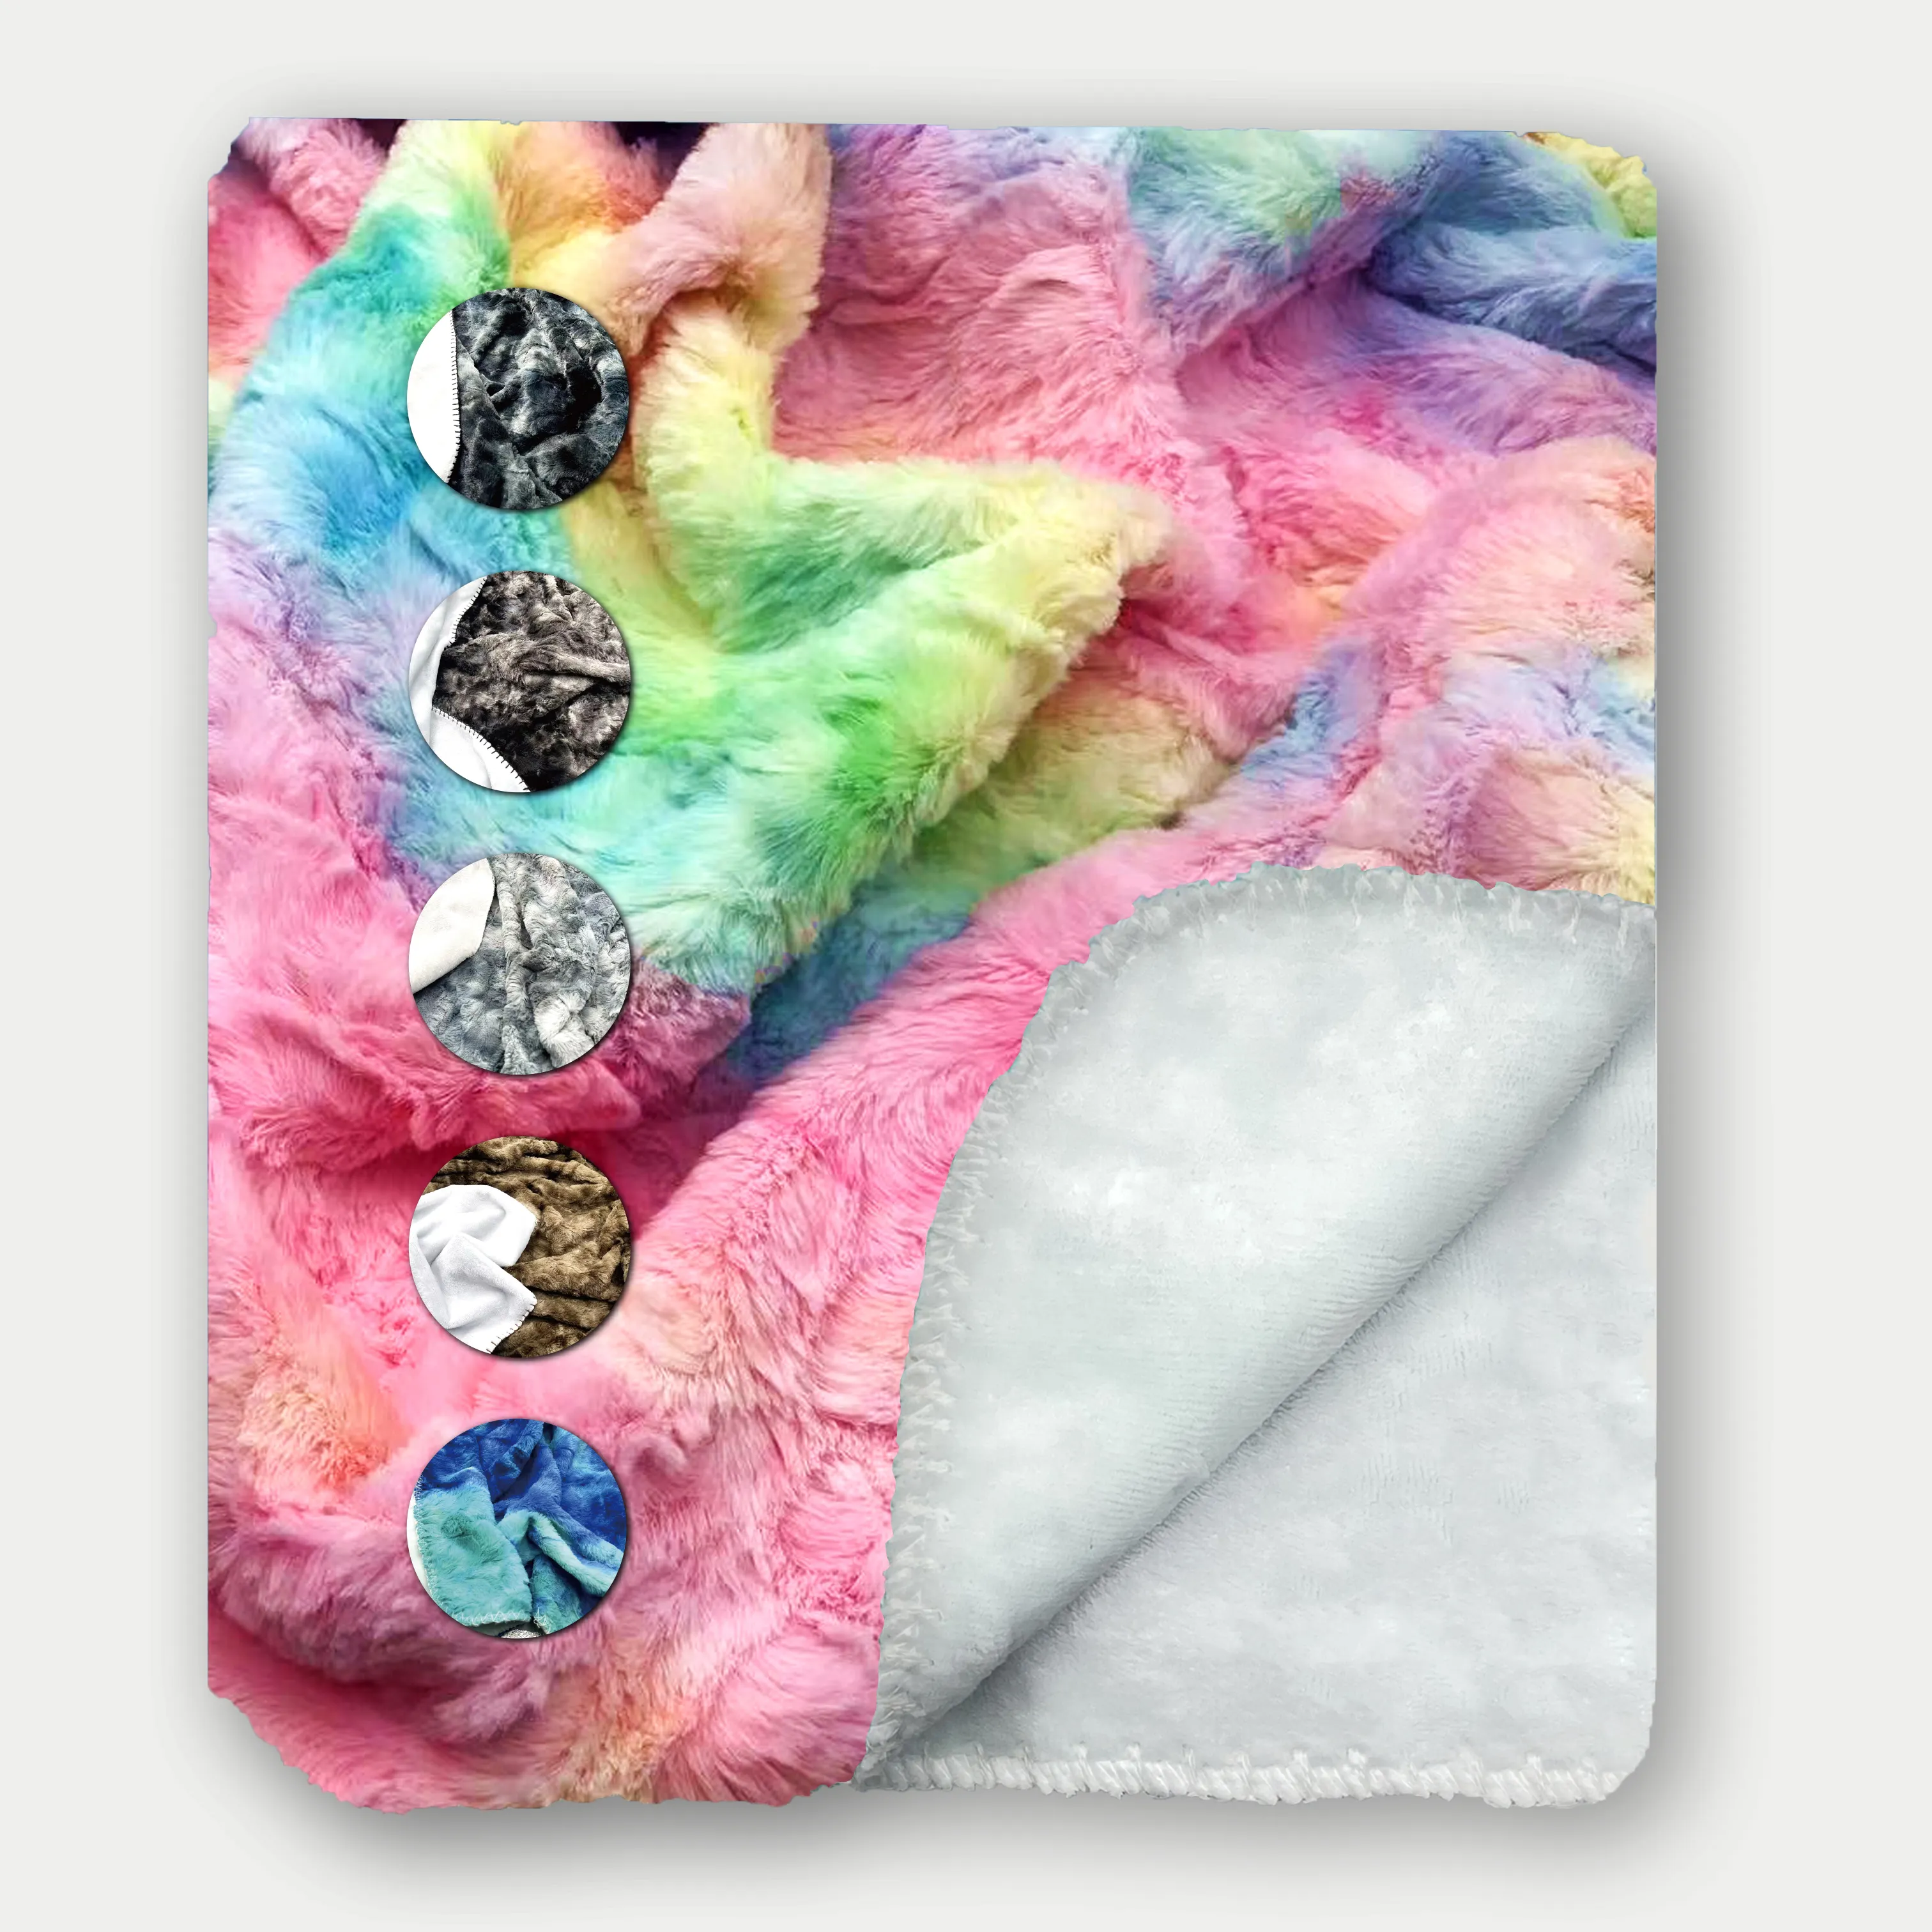 Super Soft fluffy Double fur fleece weighted Minky Fabric New Style Minky tie dye coperta per letto